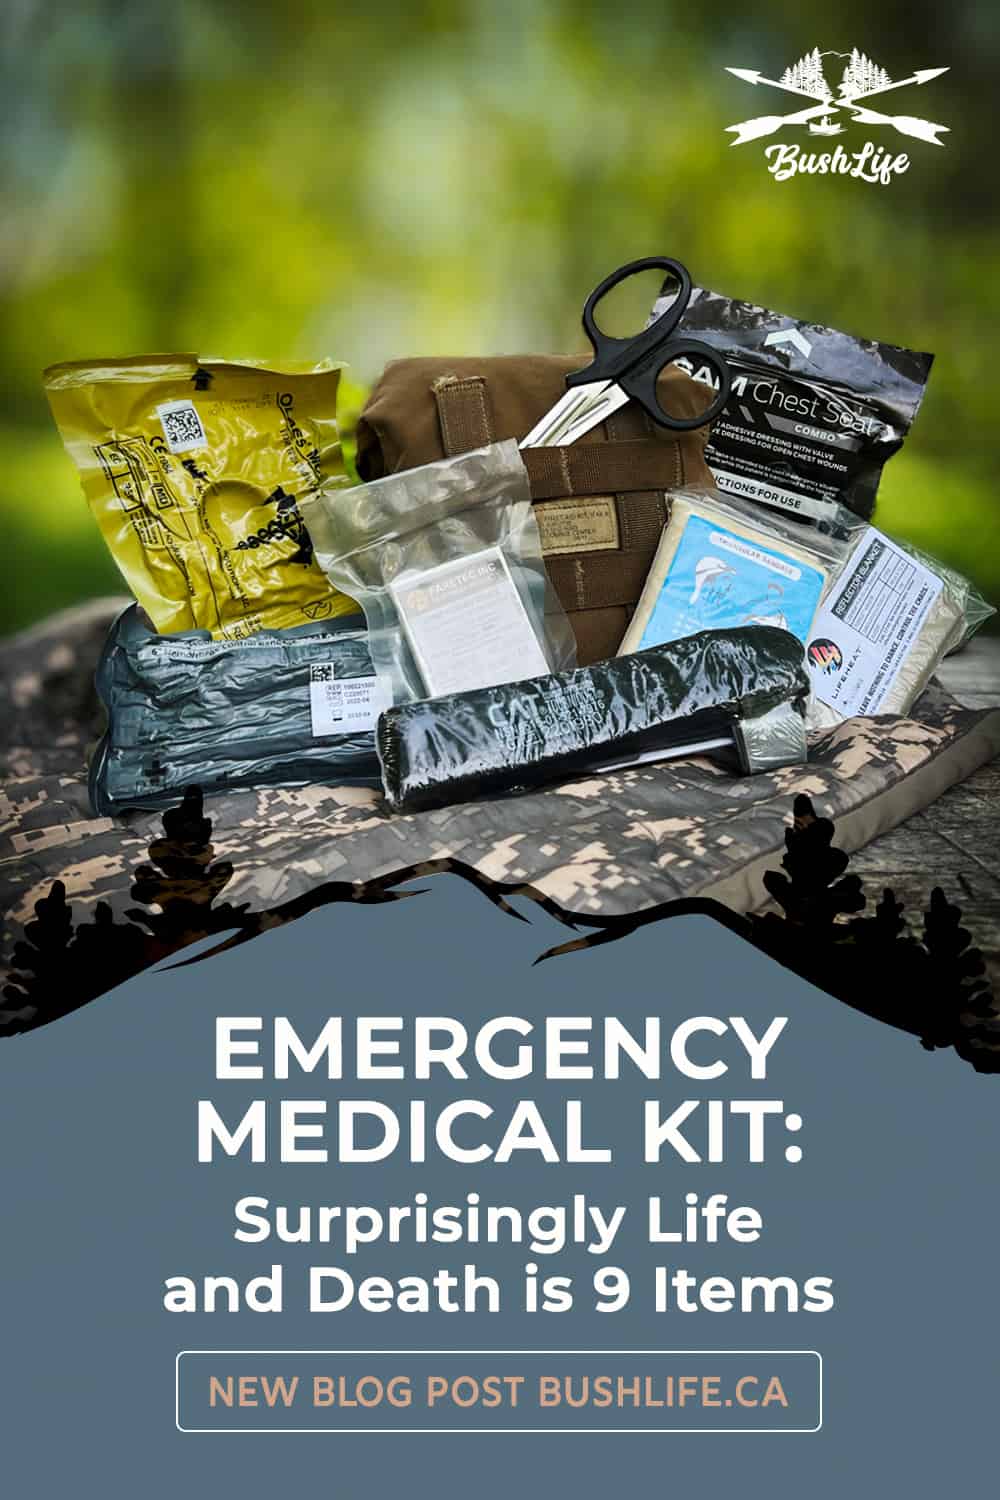 Emergency Medical Kit: Surprisingly Life and Death is 9 Items